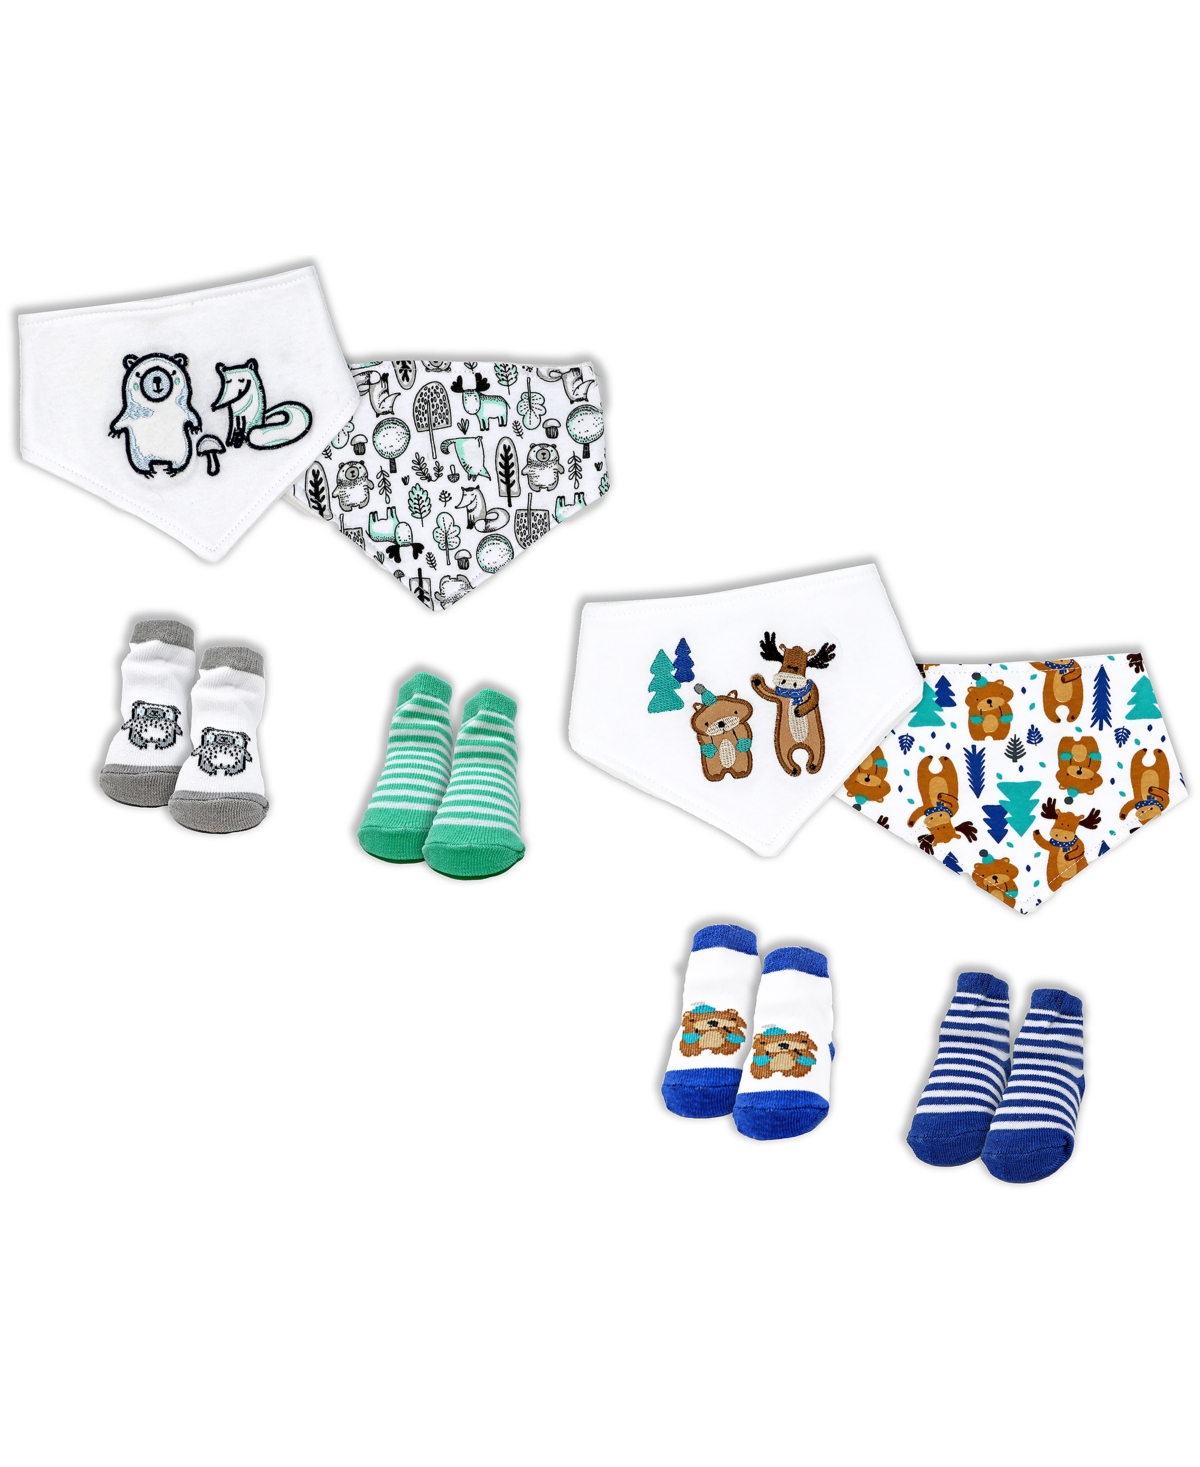 Baby Mode Baby Boys Closure Bibs And Socks, 8 Piece Set In Blue Moose